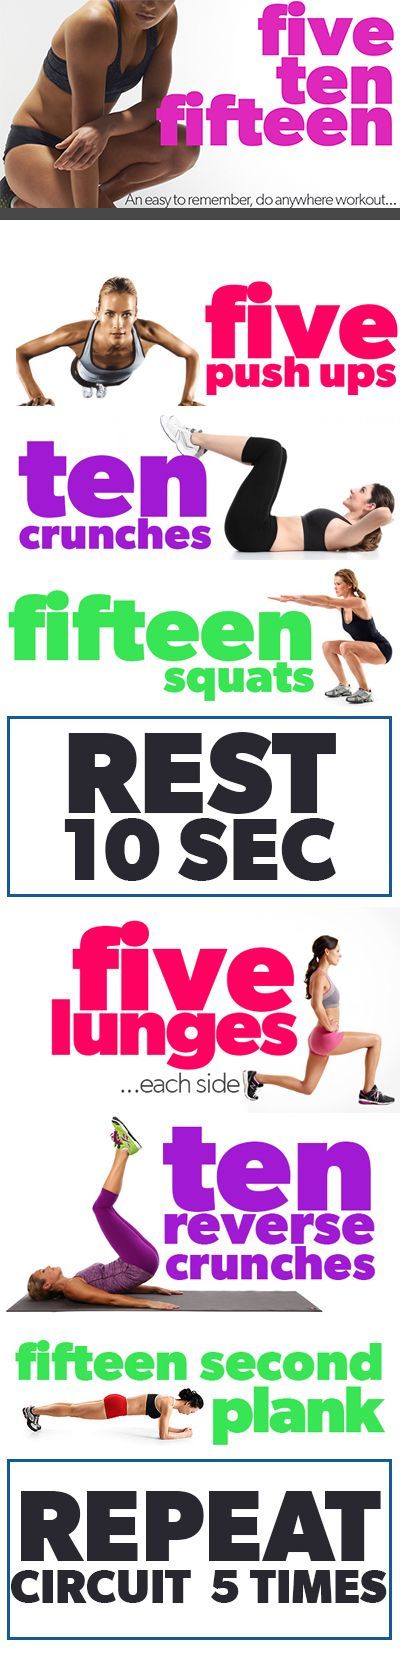 The FIVE-TEN-FIFTEEN Circuit Workout! : #fitness #health #slim #diet #weight #tips #workout #exercise #fit #motivation #arm